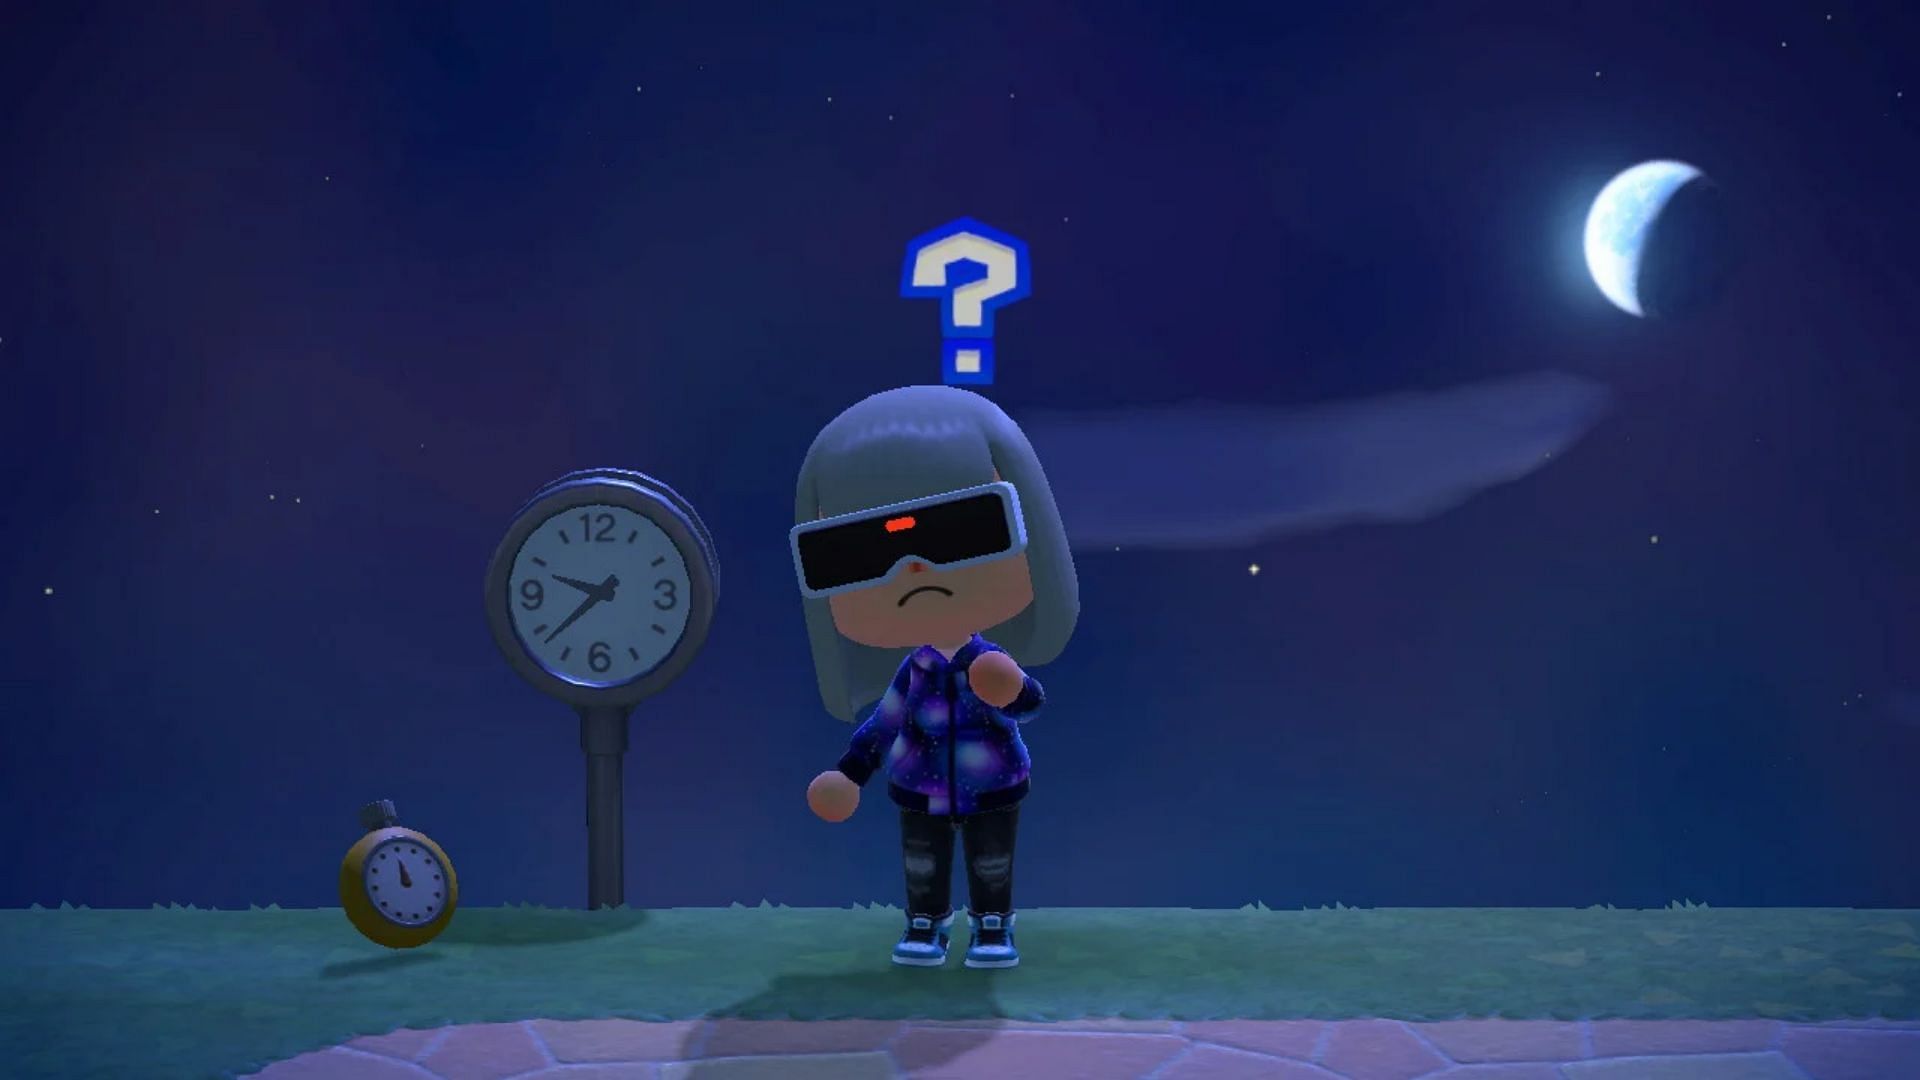 Time travel in Animal Crossing: New Horizons has its own consequences that players have to face (Image via Nintendo Life)